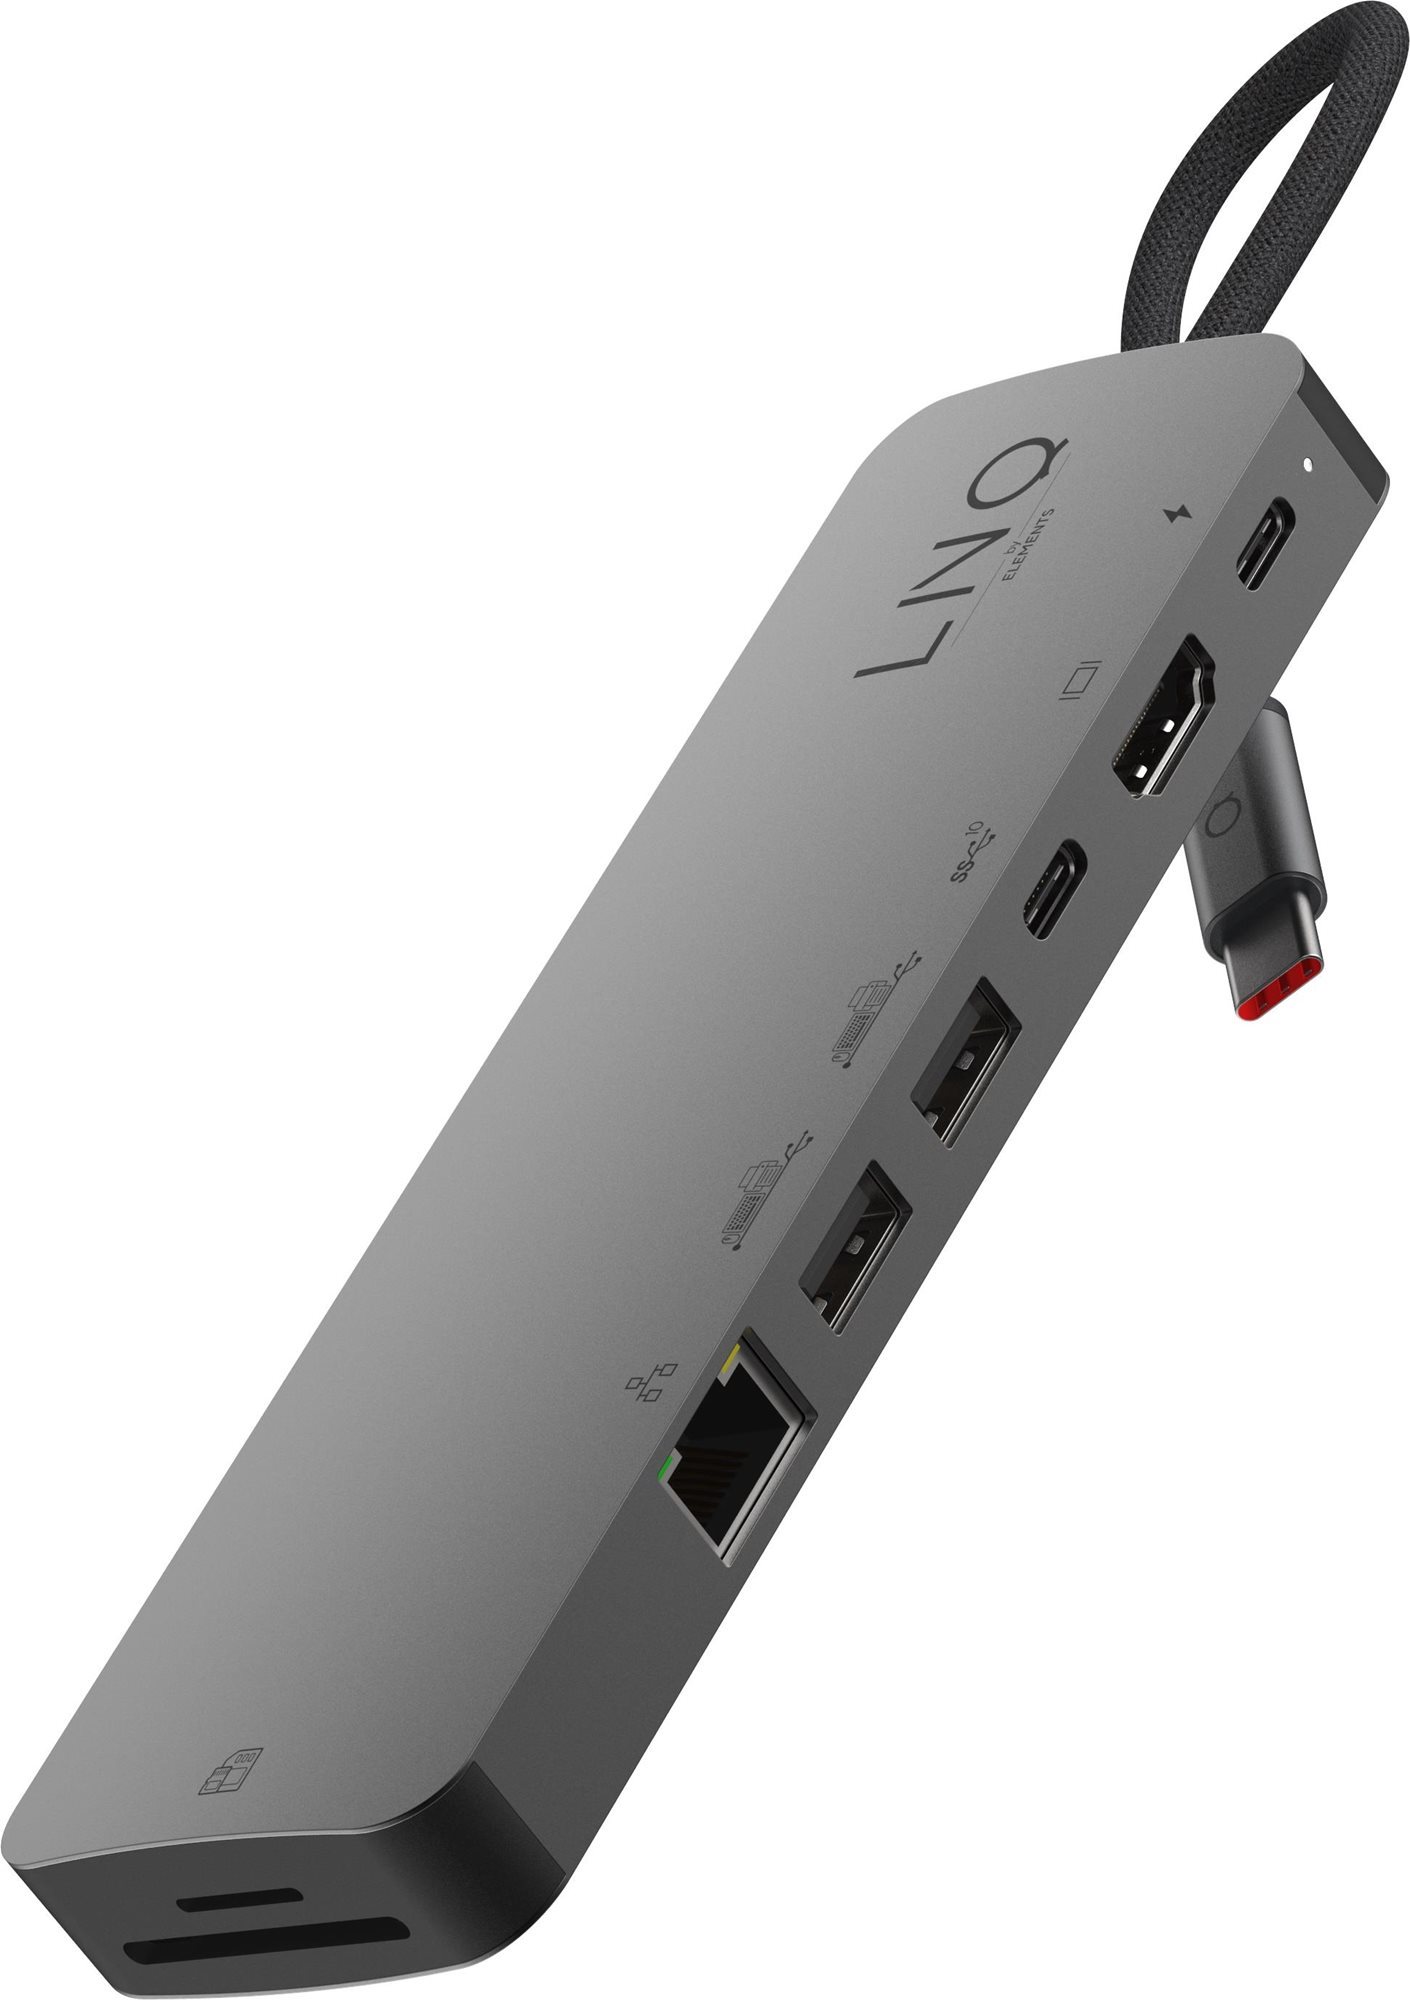 LINQ Pro Studio USB-C 10Gbps Multiport Hub with PD, 4K HDMI, NVMe M2 SSD, SD4.0 Card Reader and 2.5G